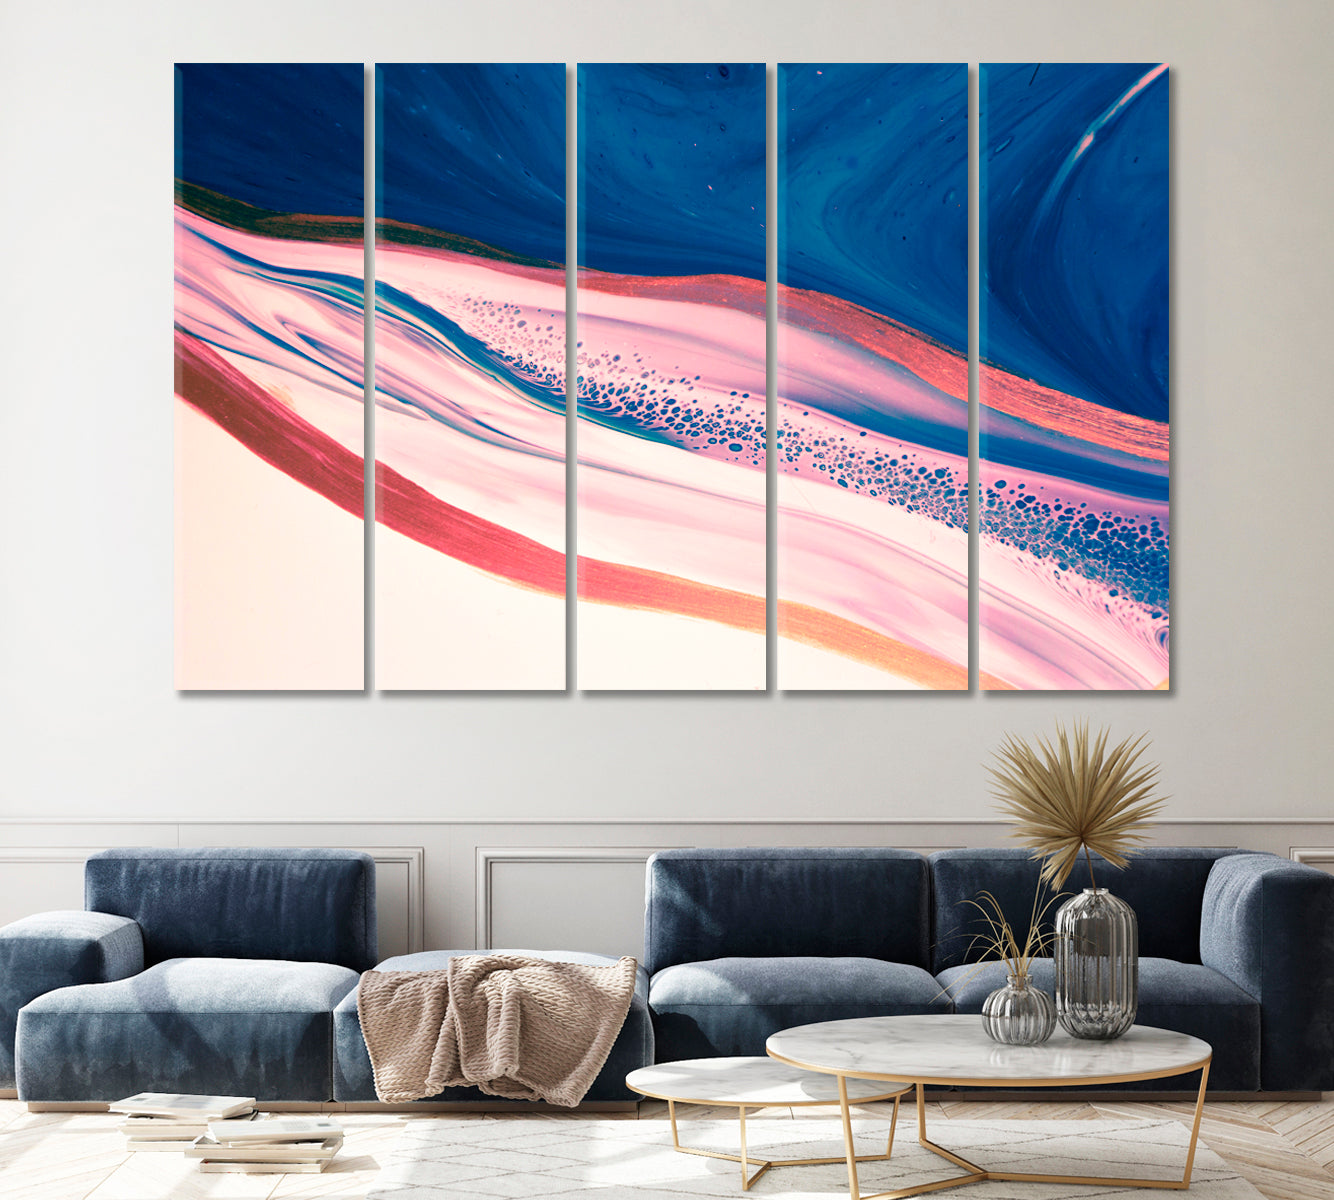 Minimalistic Blue & Pink Ink Pattern Canvas Print ArtLexy 5 Panels 36"x24" inches 